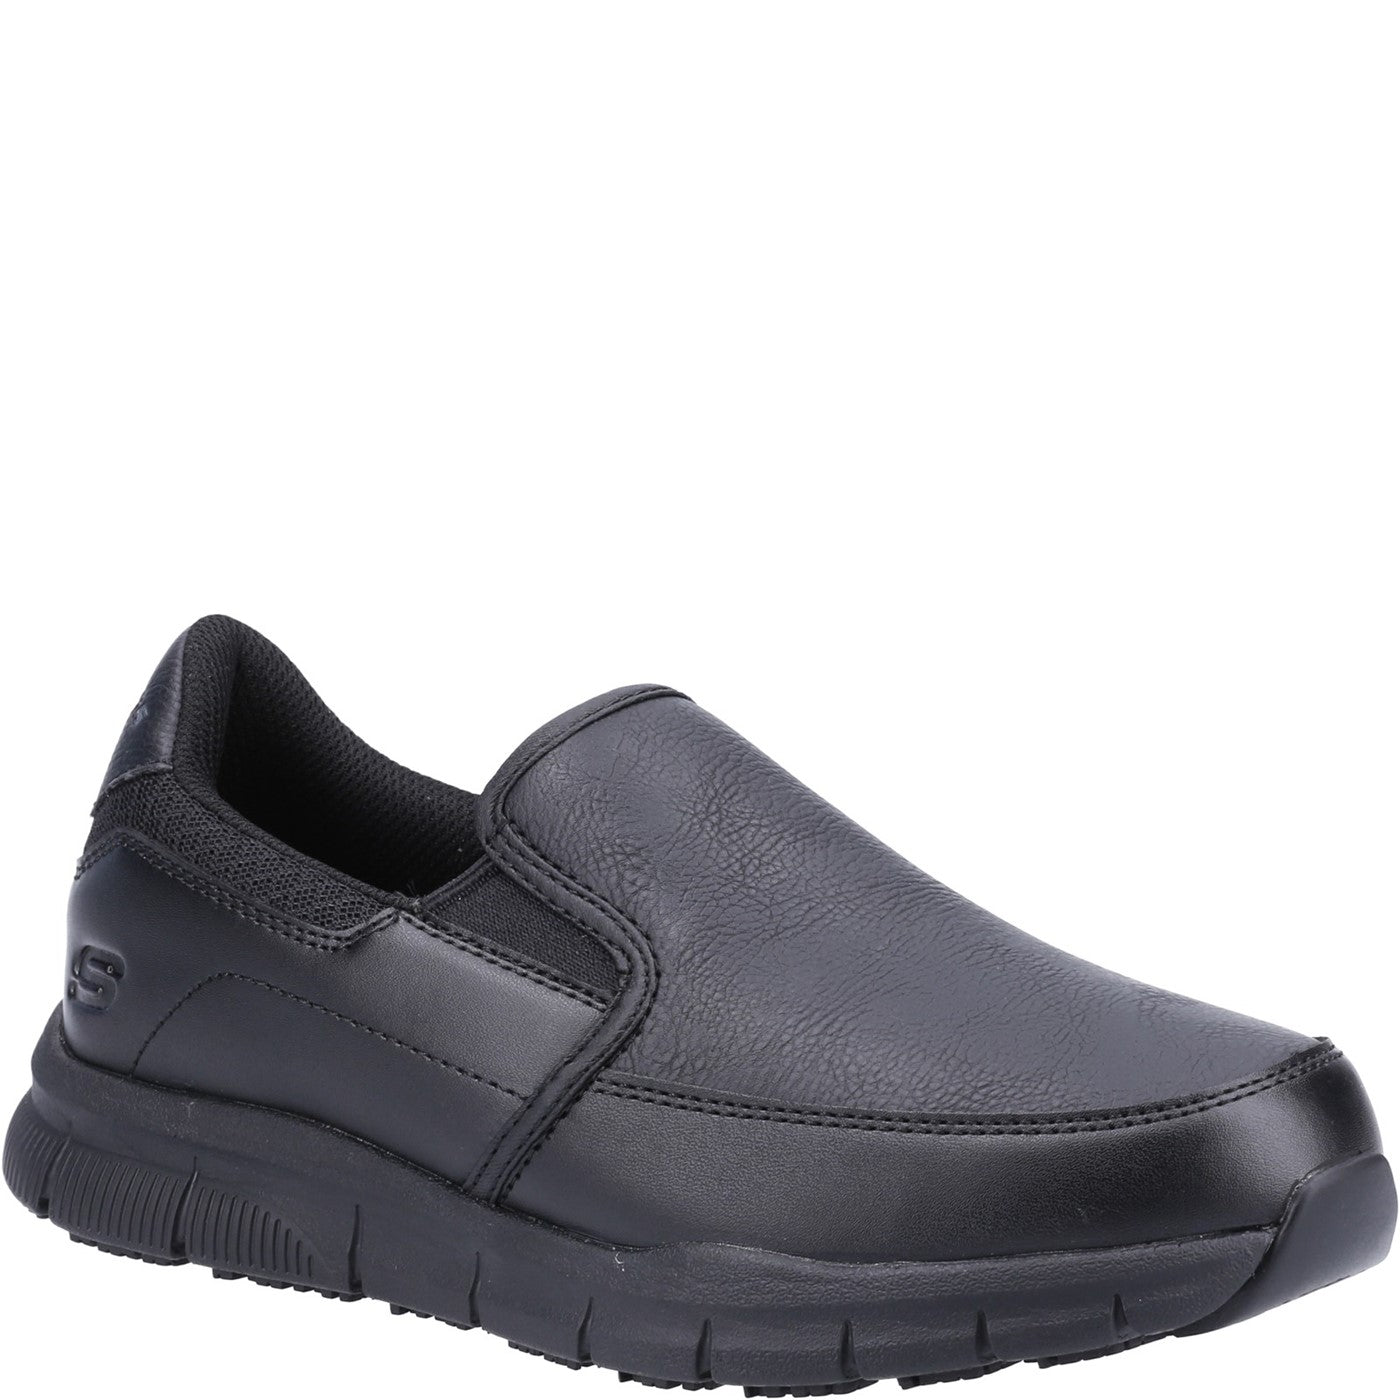 Women's Skechers Nampa Annod Occupational Shoes